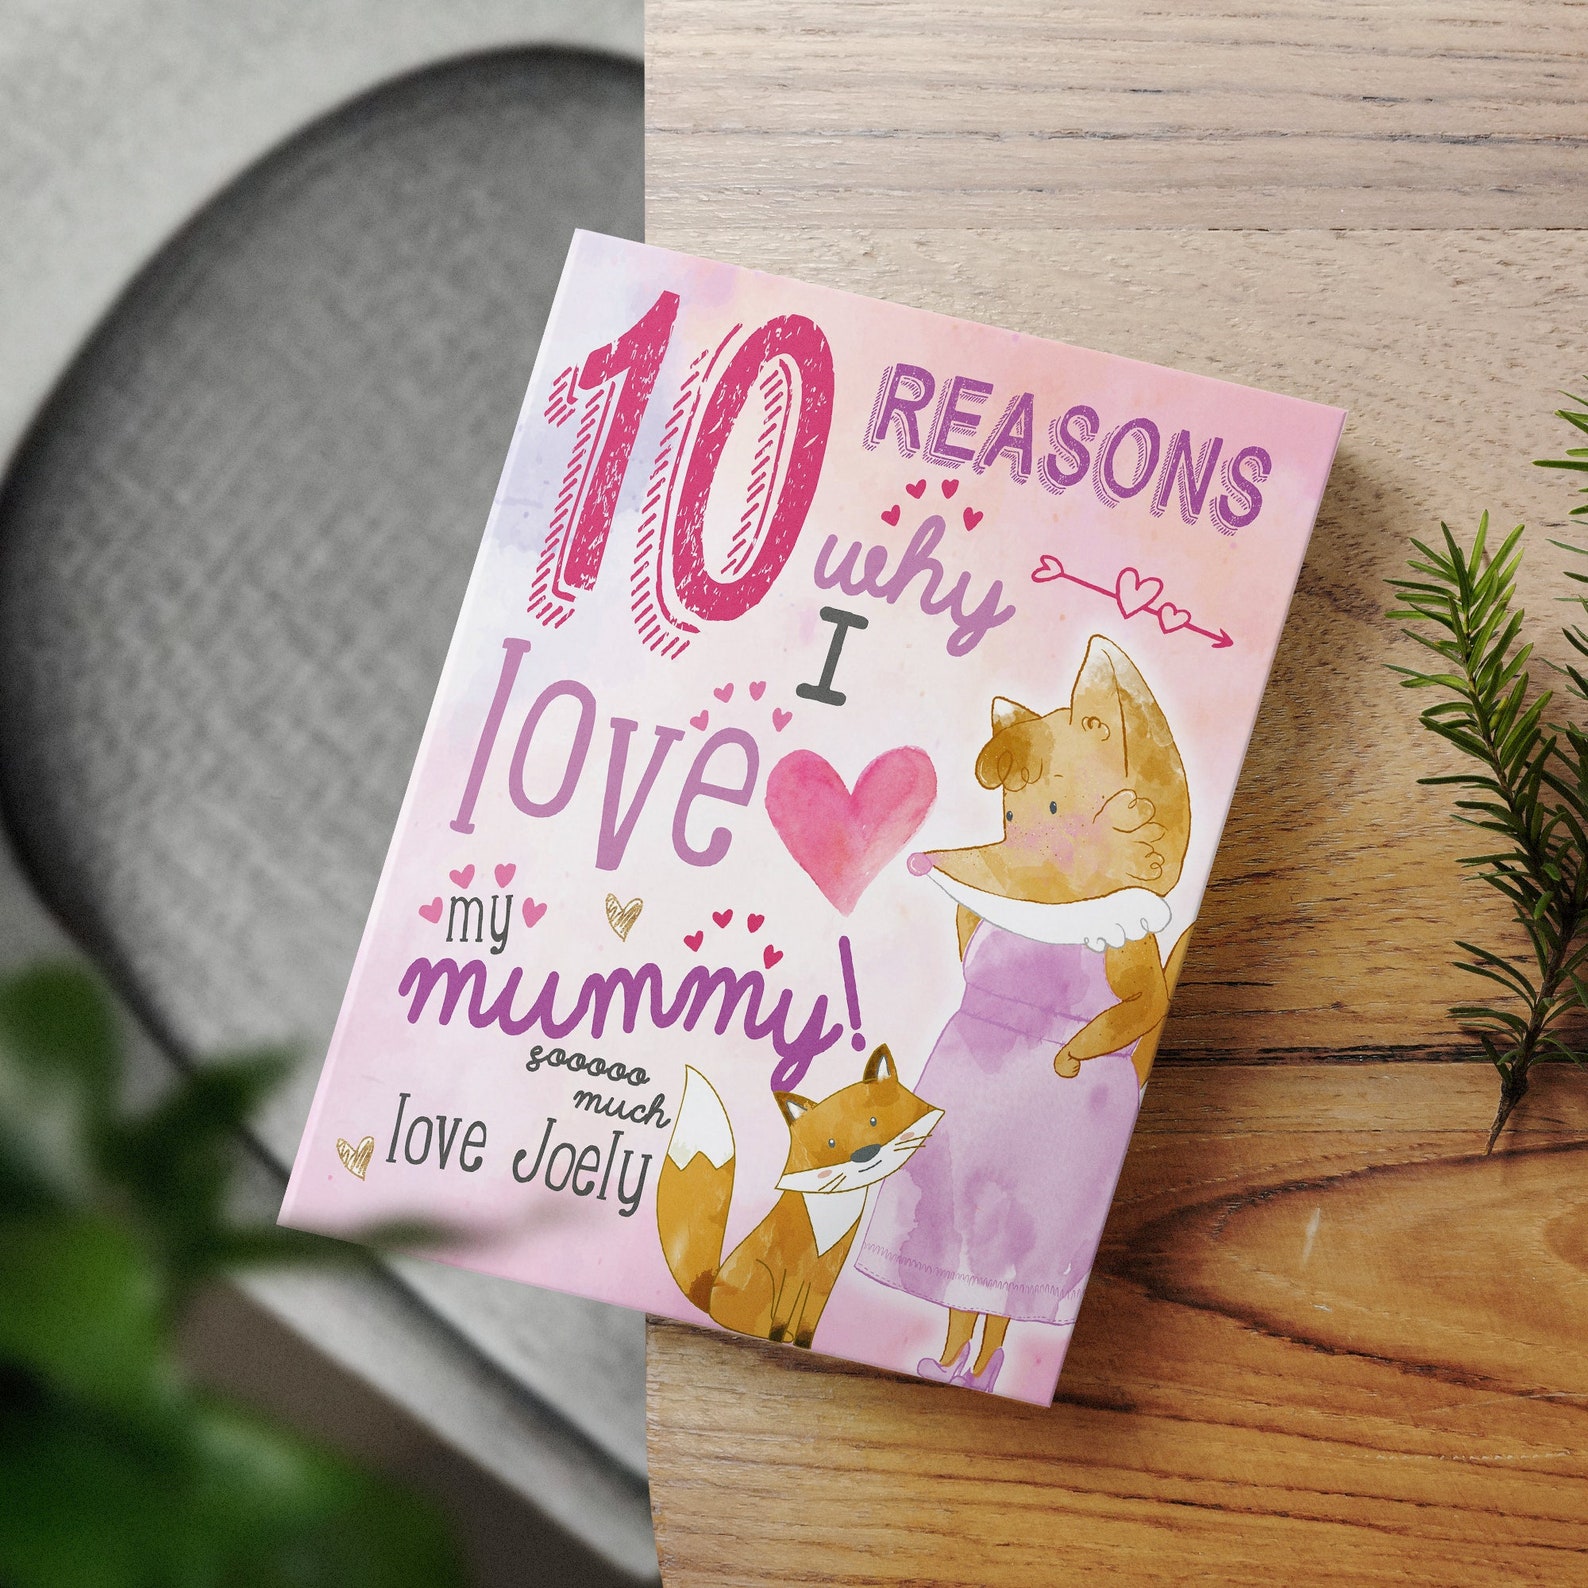 Personalised "10 Things I love About Mummy" Book